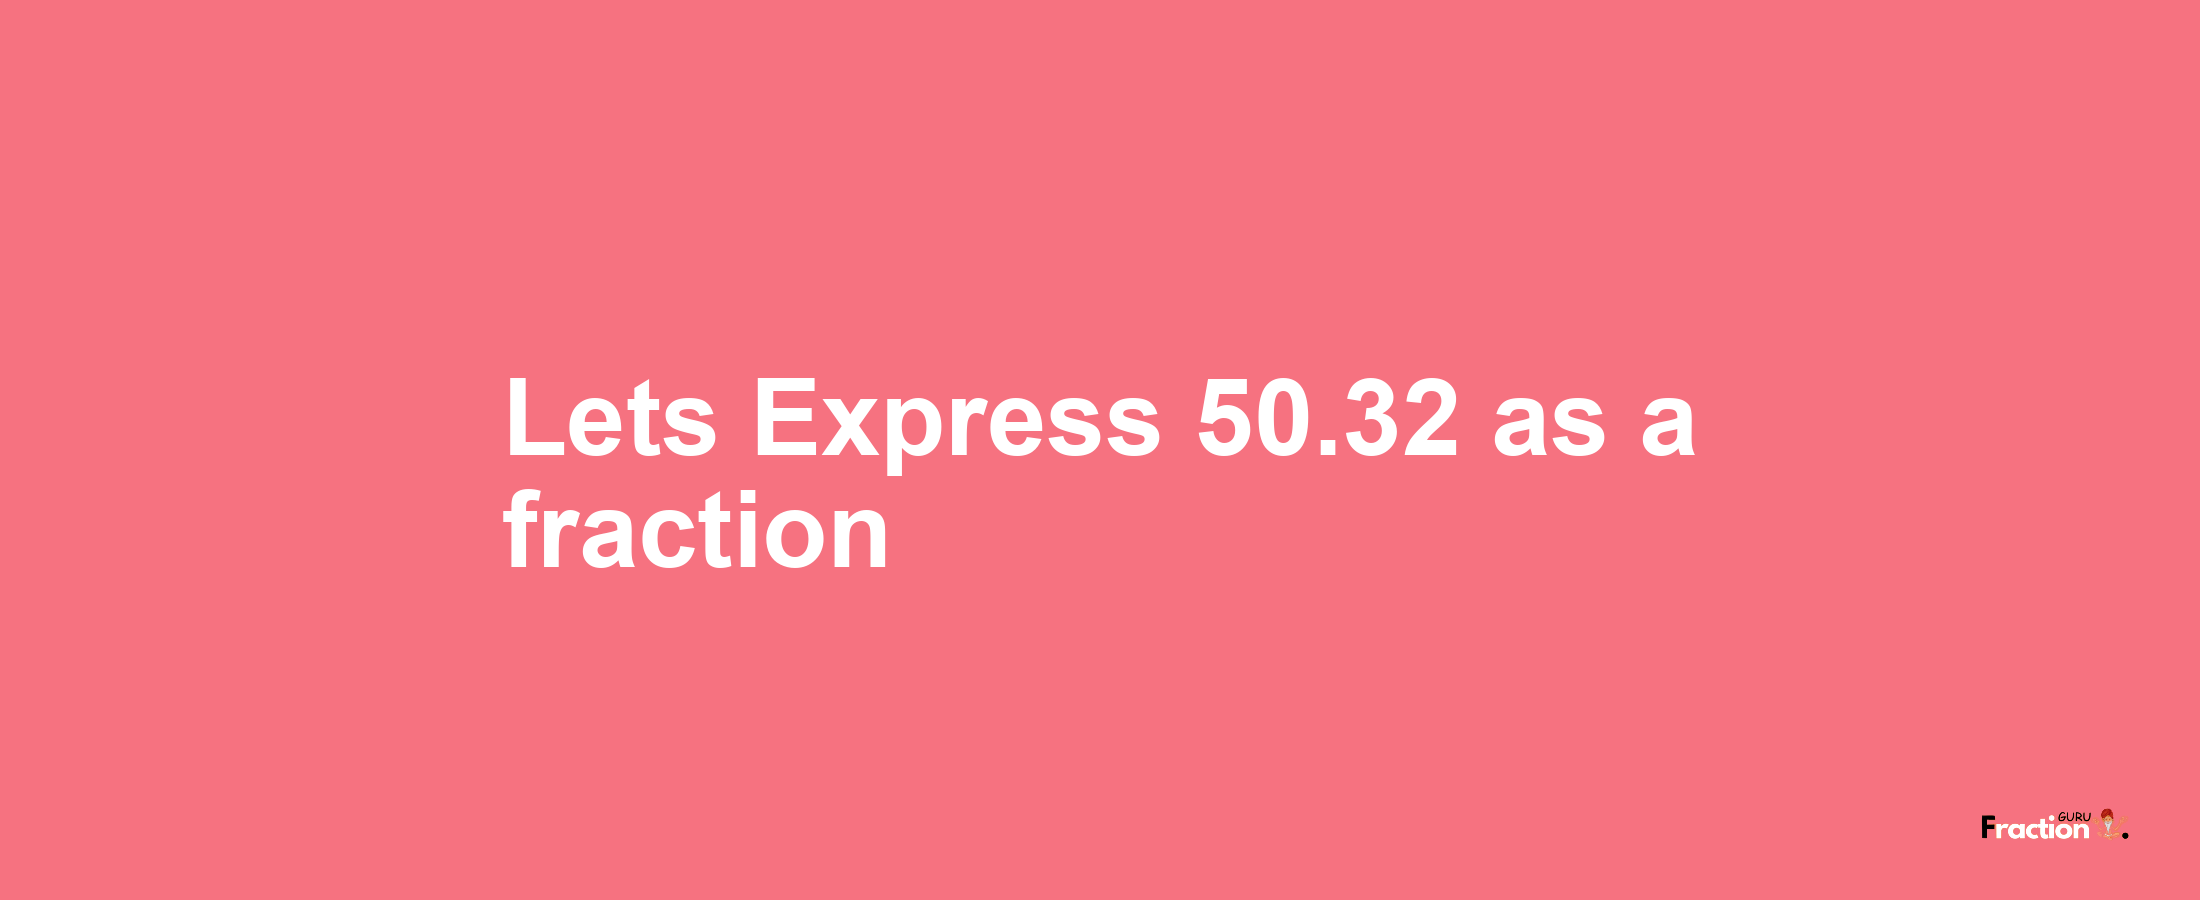 Lets Express 50.32 as afraction